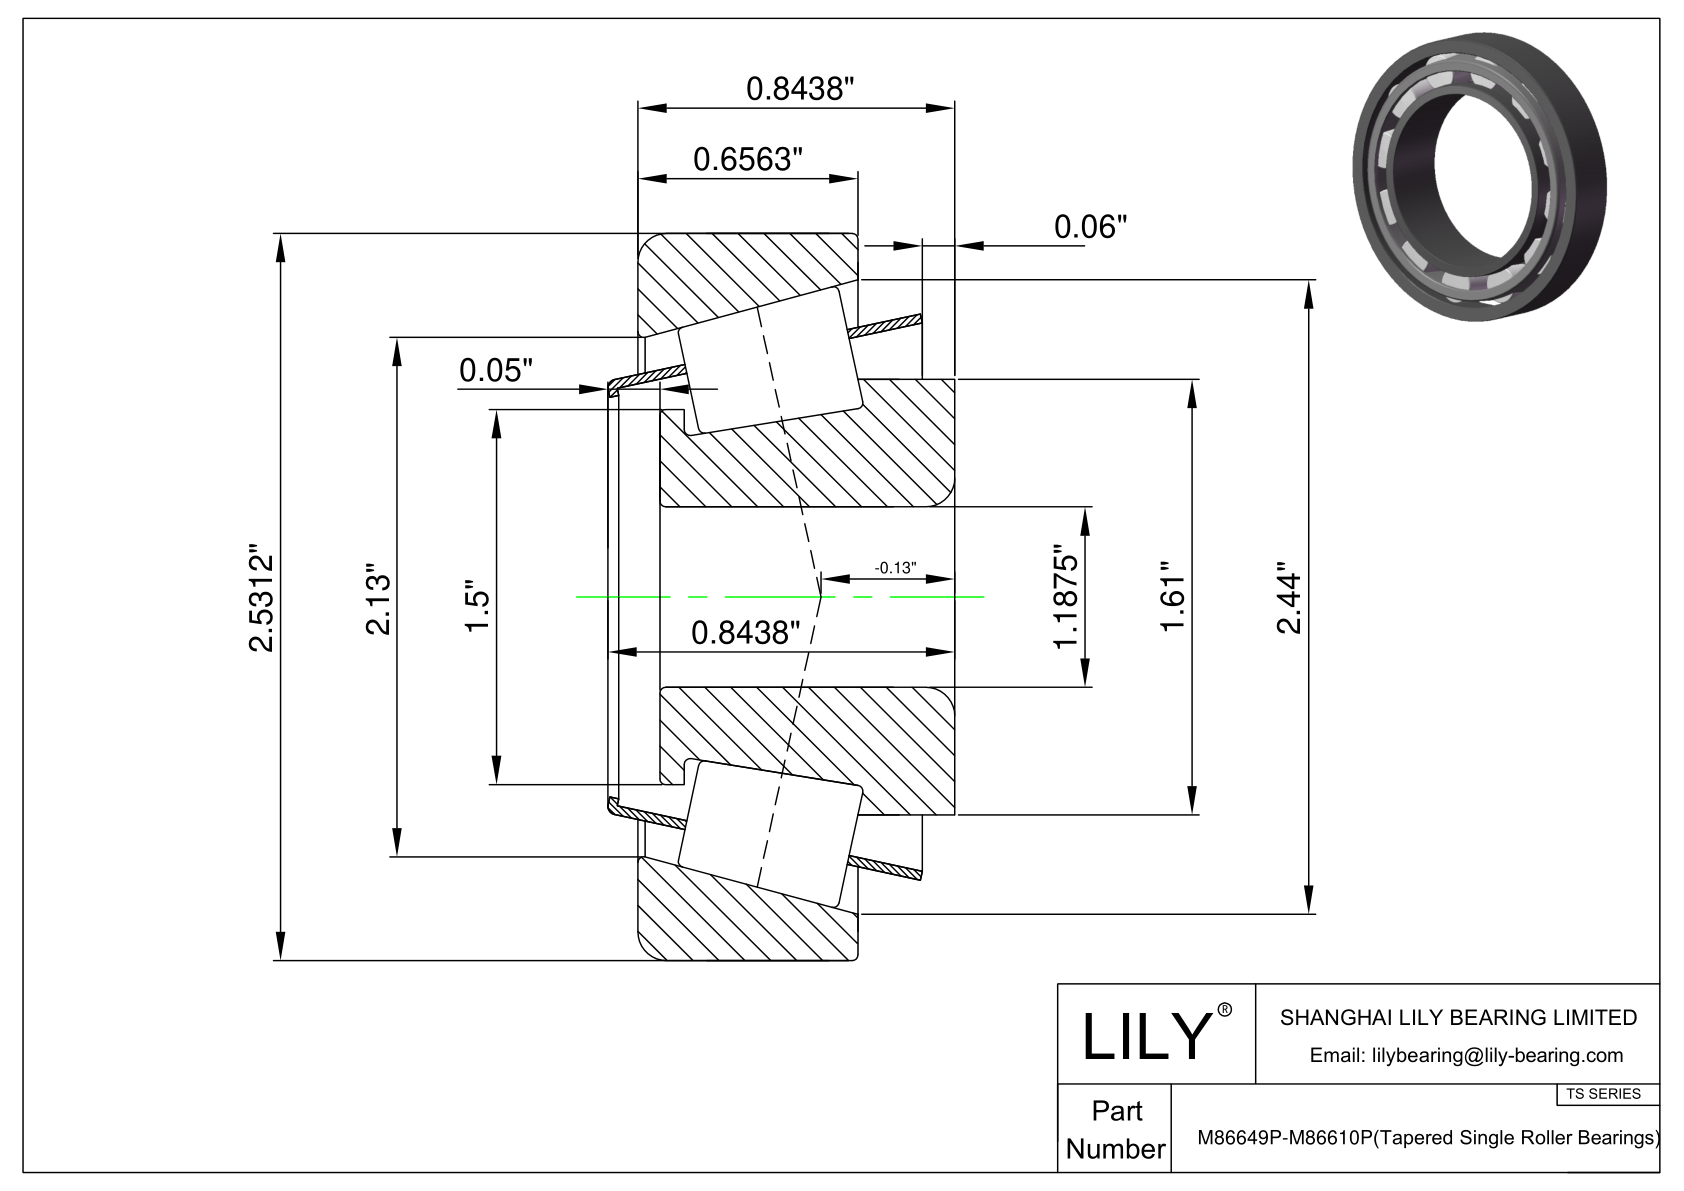 M86649P-M86610P TS (Tapered Single Roller Bearings) (Imperial) cad drawing